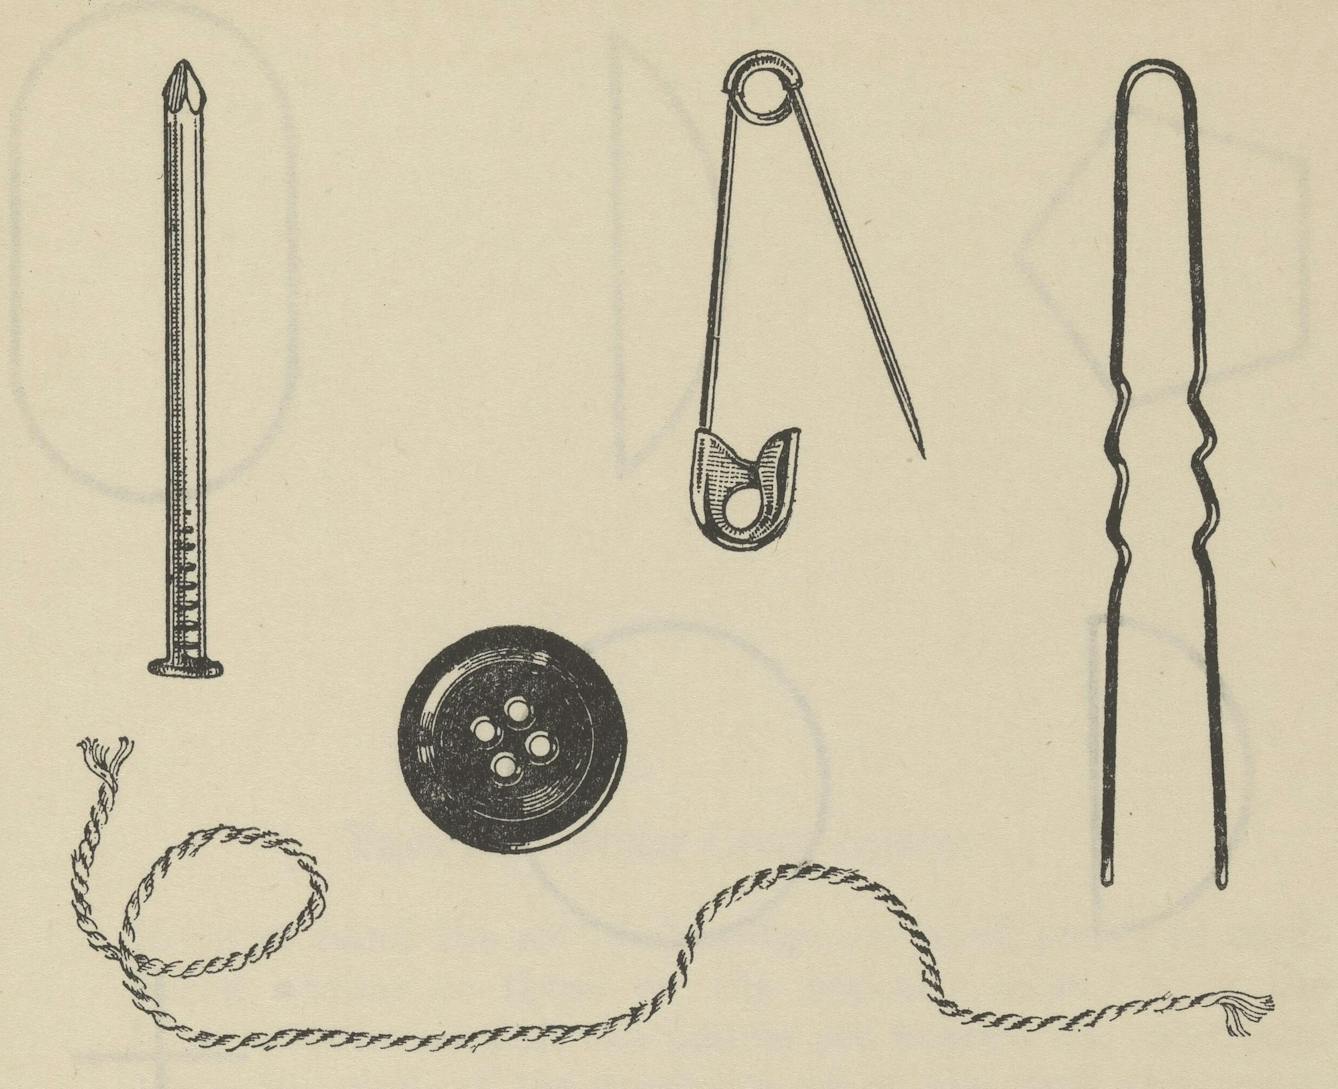 Black and white line drawing showing several objects including a button, a safety pin, a piece of string and a nail.